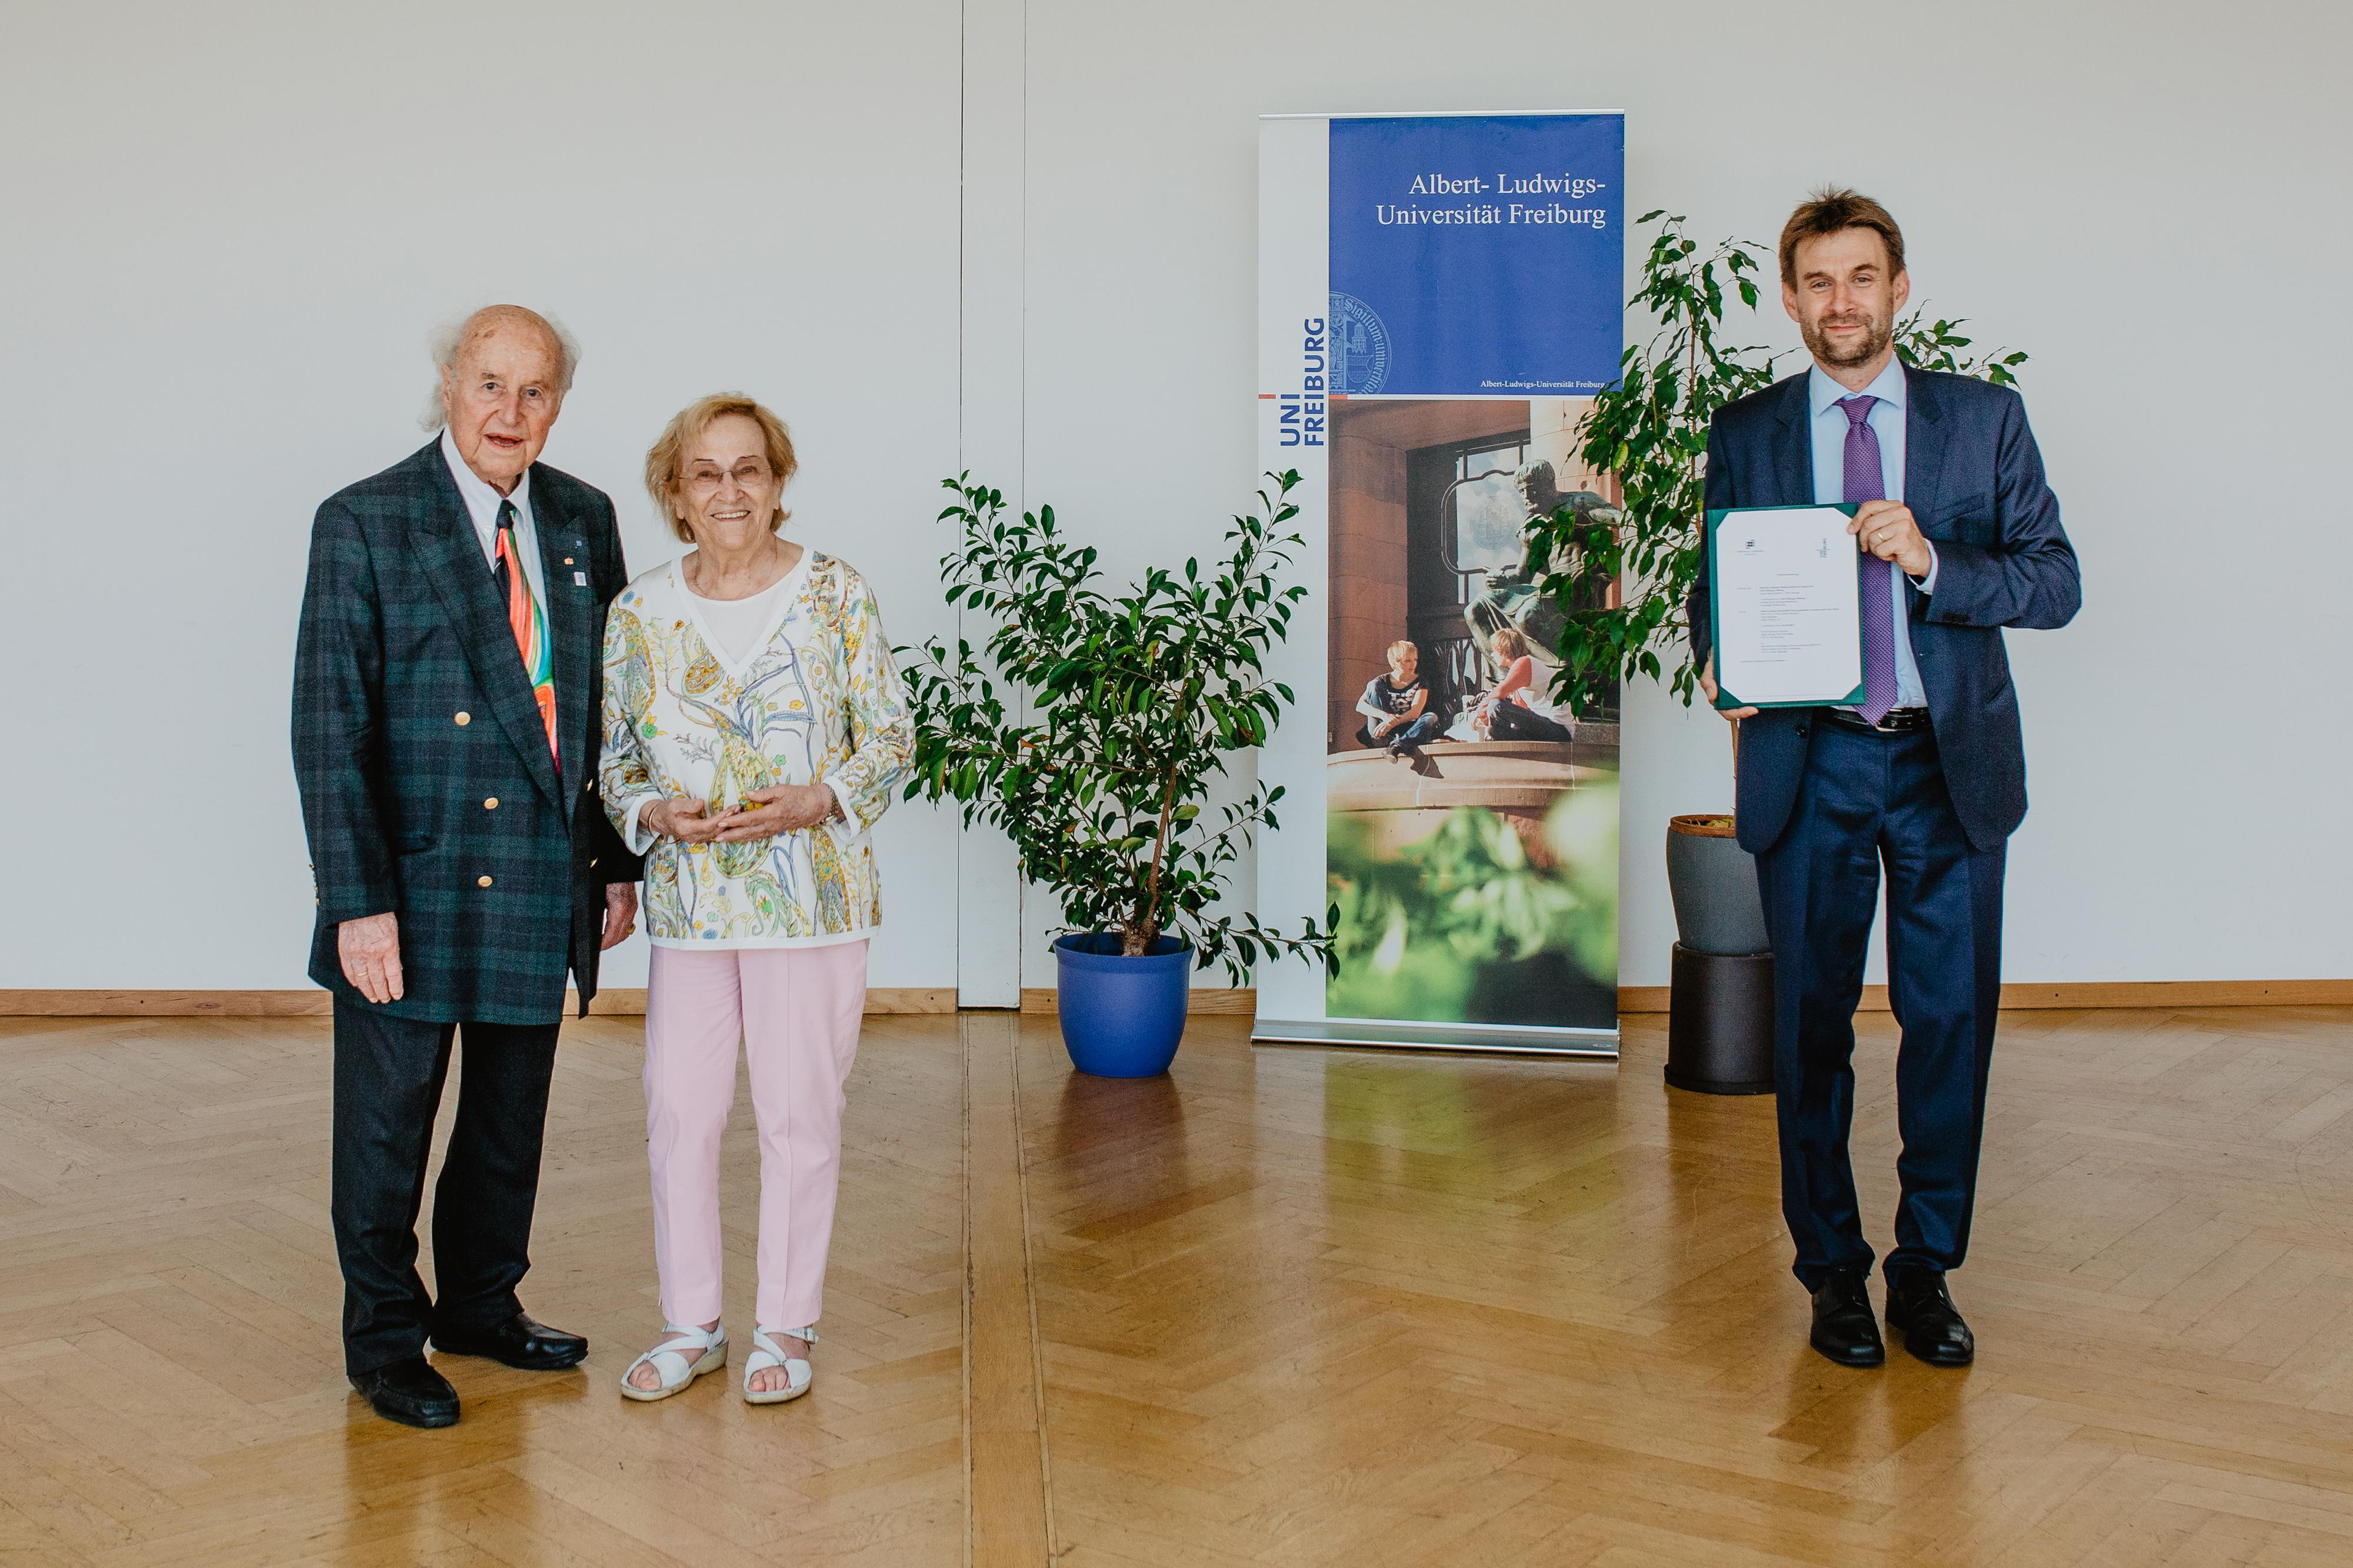 Rüdiger Quay has accepted the endowed chair which is funded by the couple Gerda and Fritz Ruf.